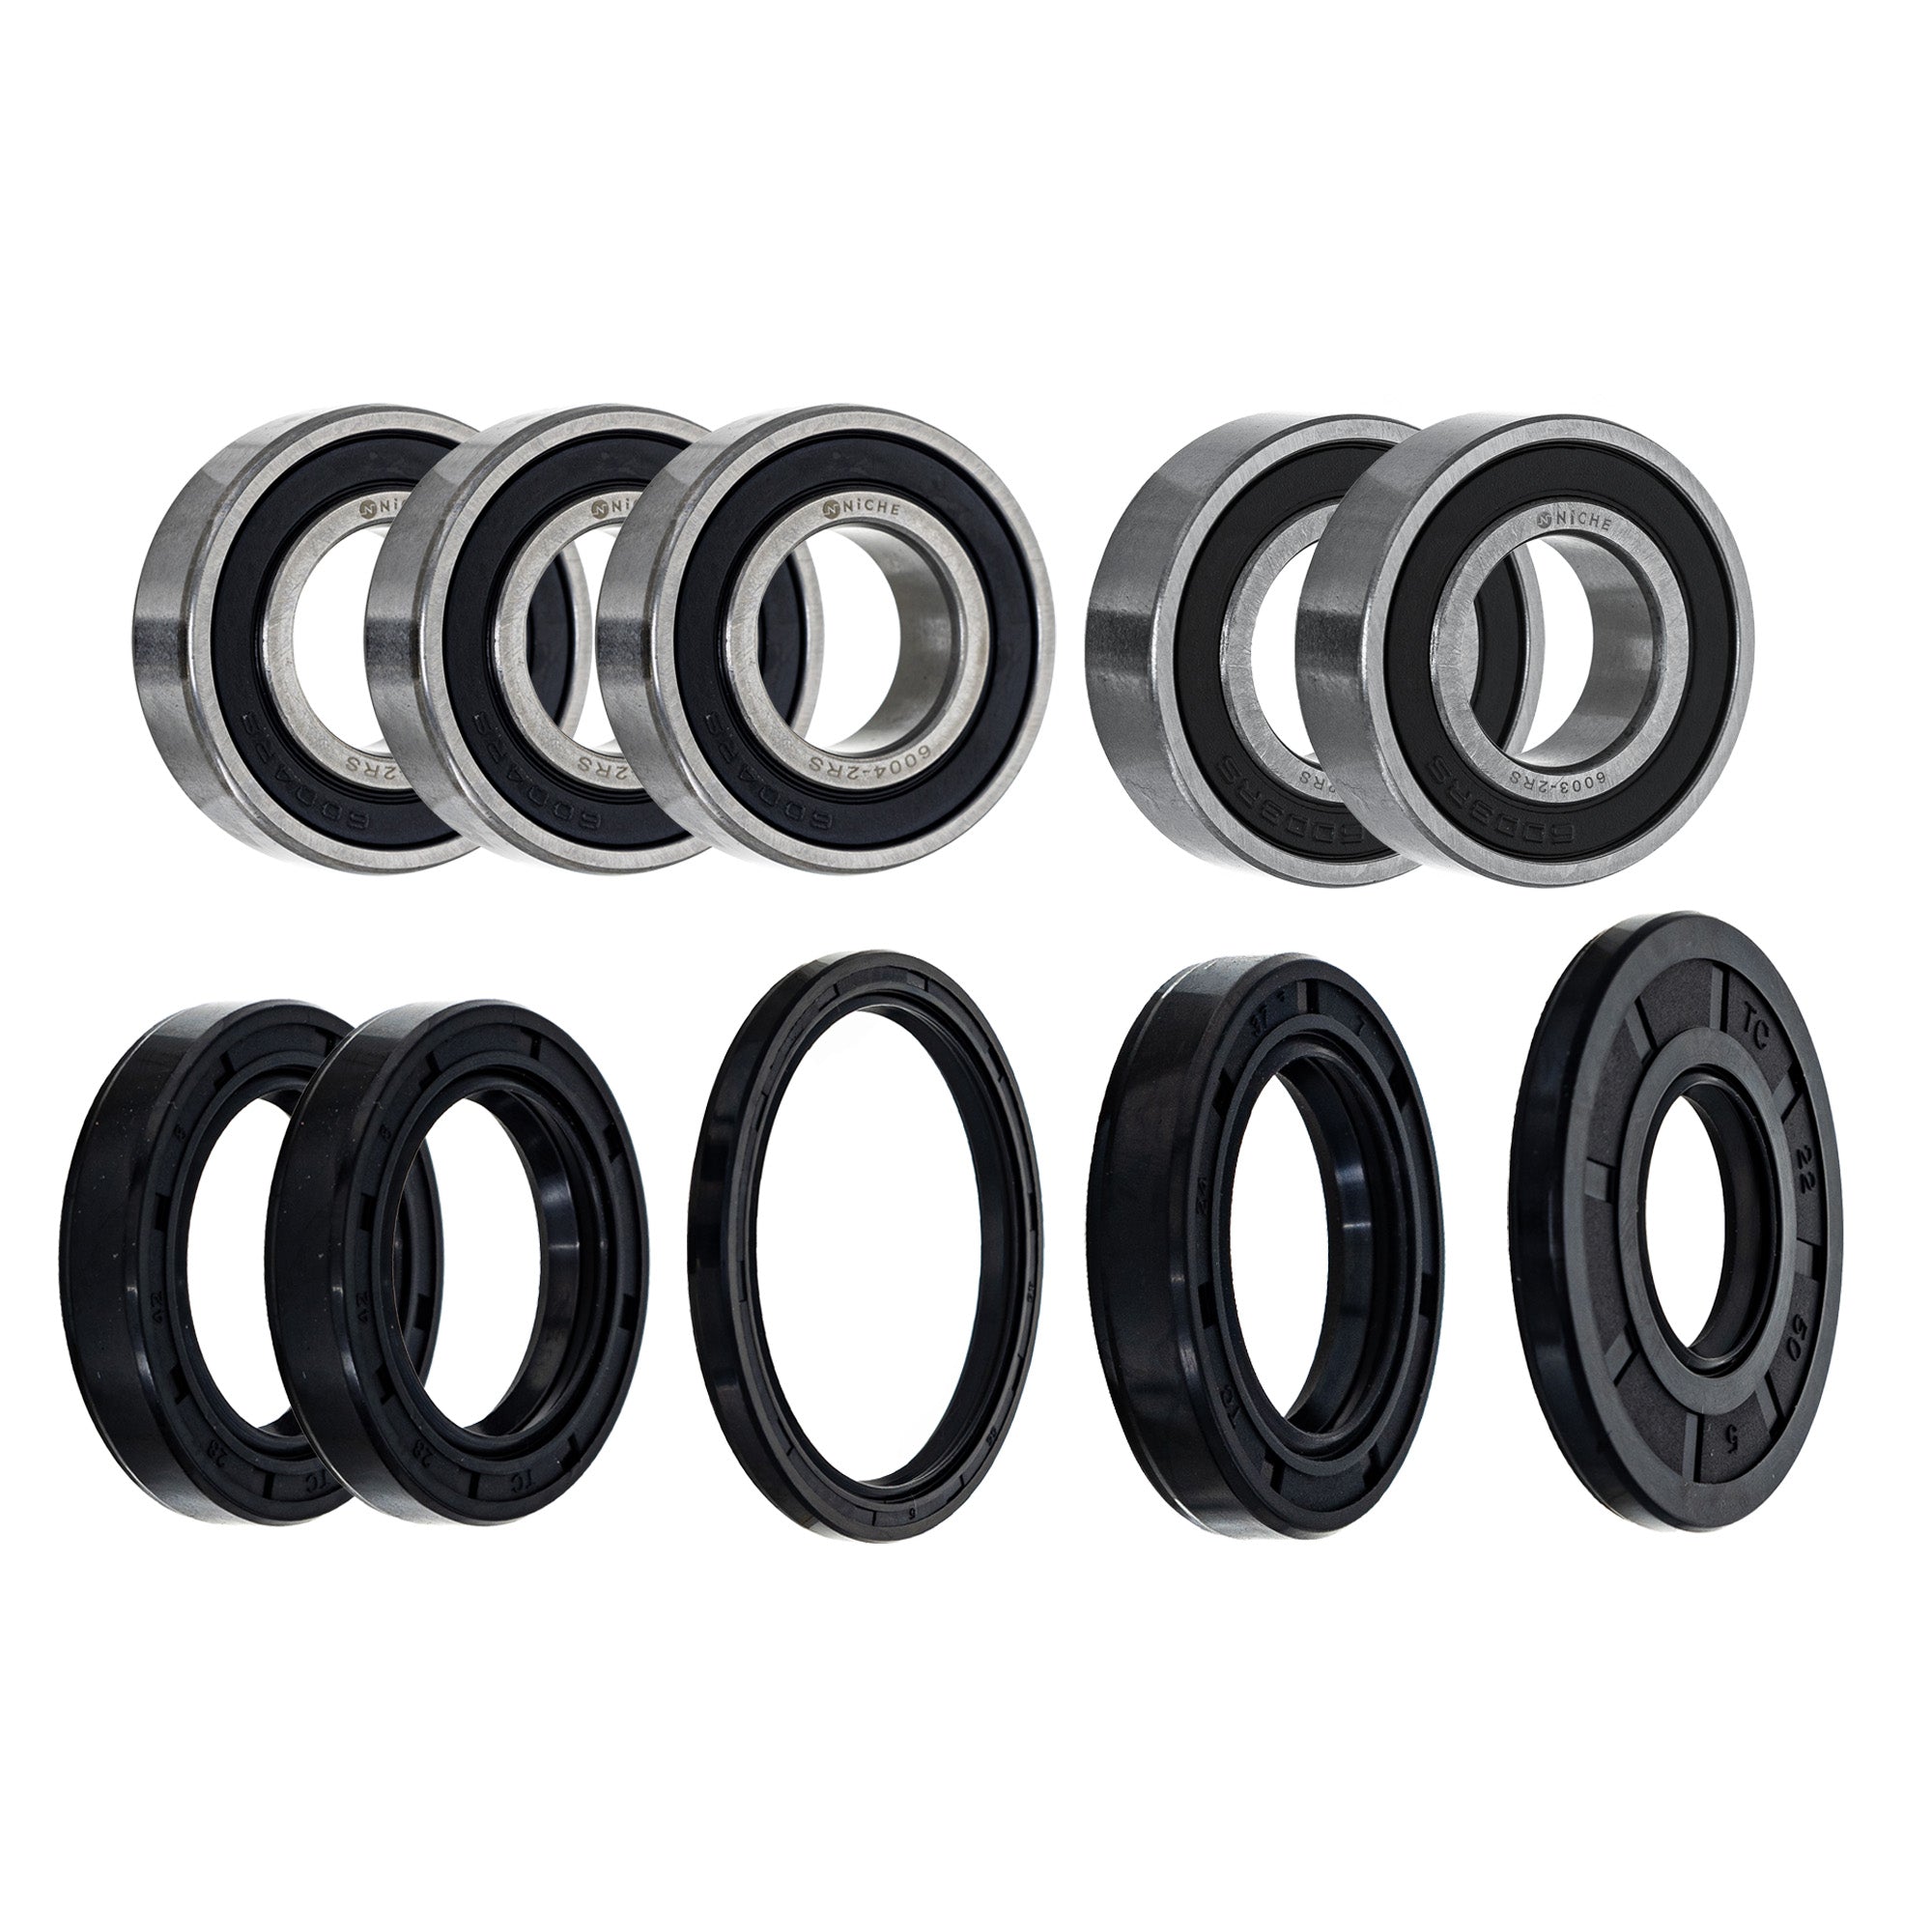 Wheel Bearing Seal Kit for zOTHER Ref No CR500R CR250R CR125R NICHE MK1008798